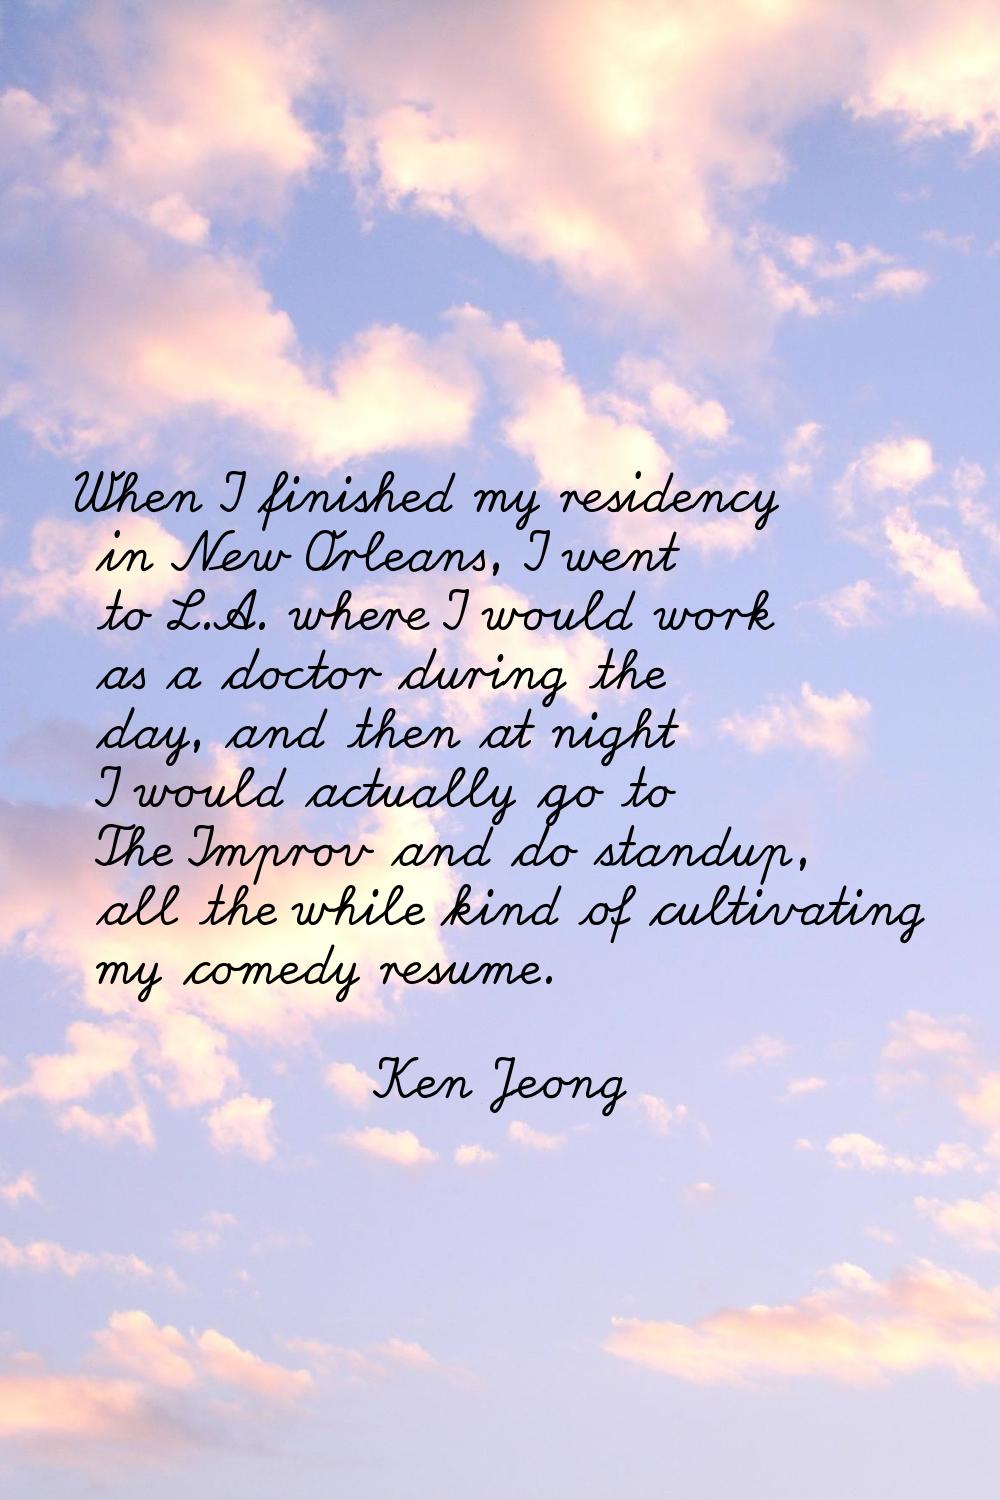 When I finished my residency in New Orleans, I went to L.A. where I would work as a doctor during t